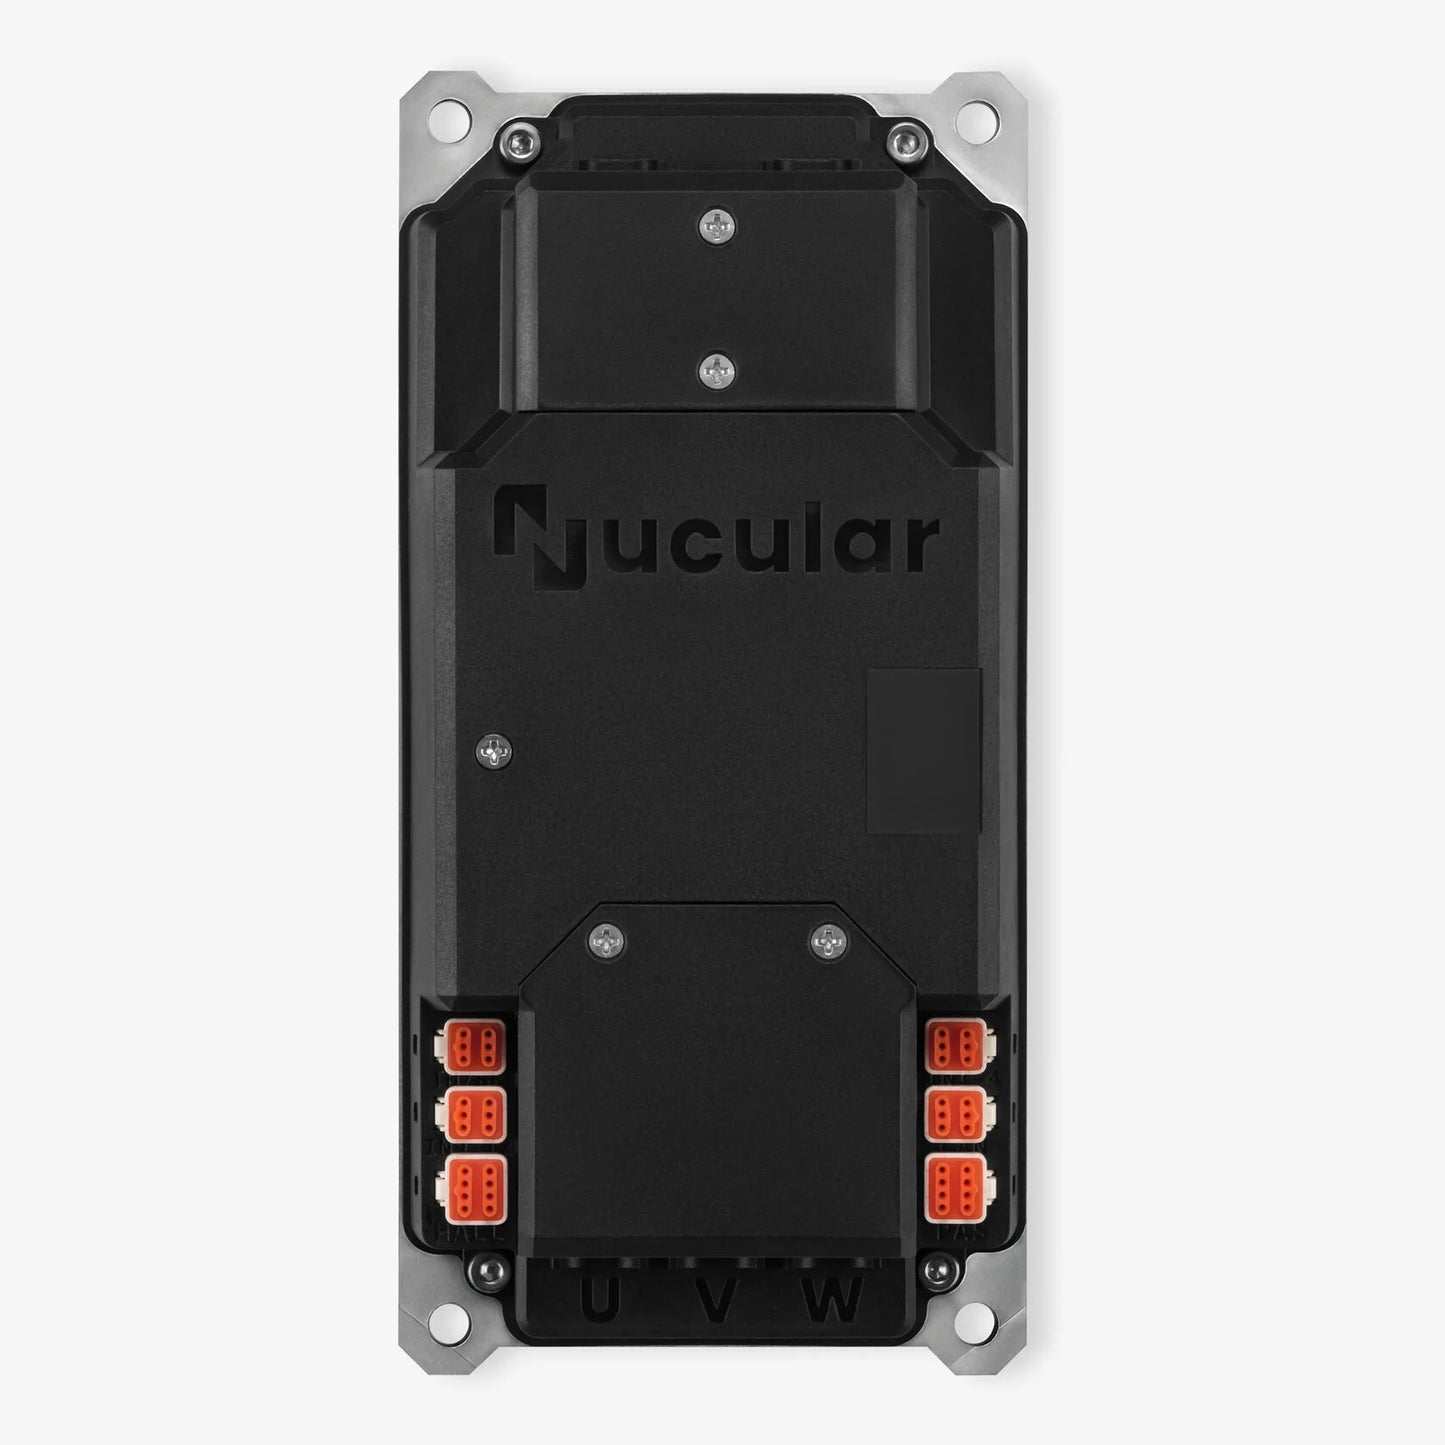 Nucular controller 24f with Display